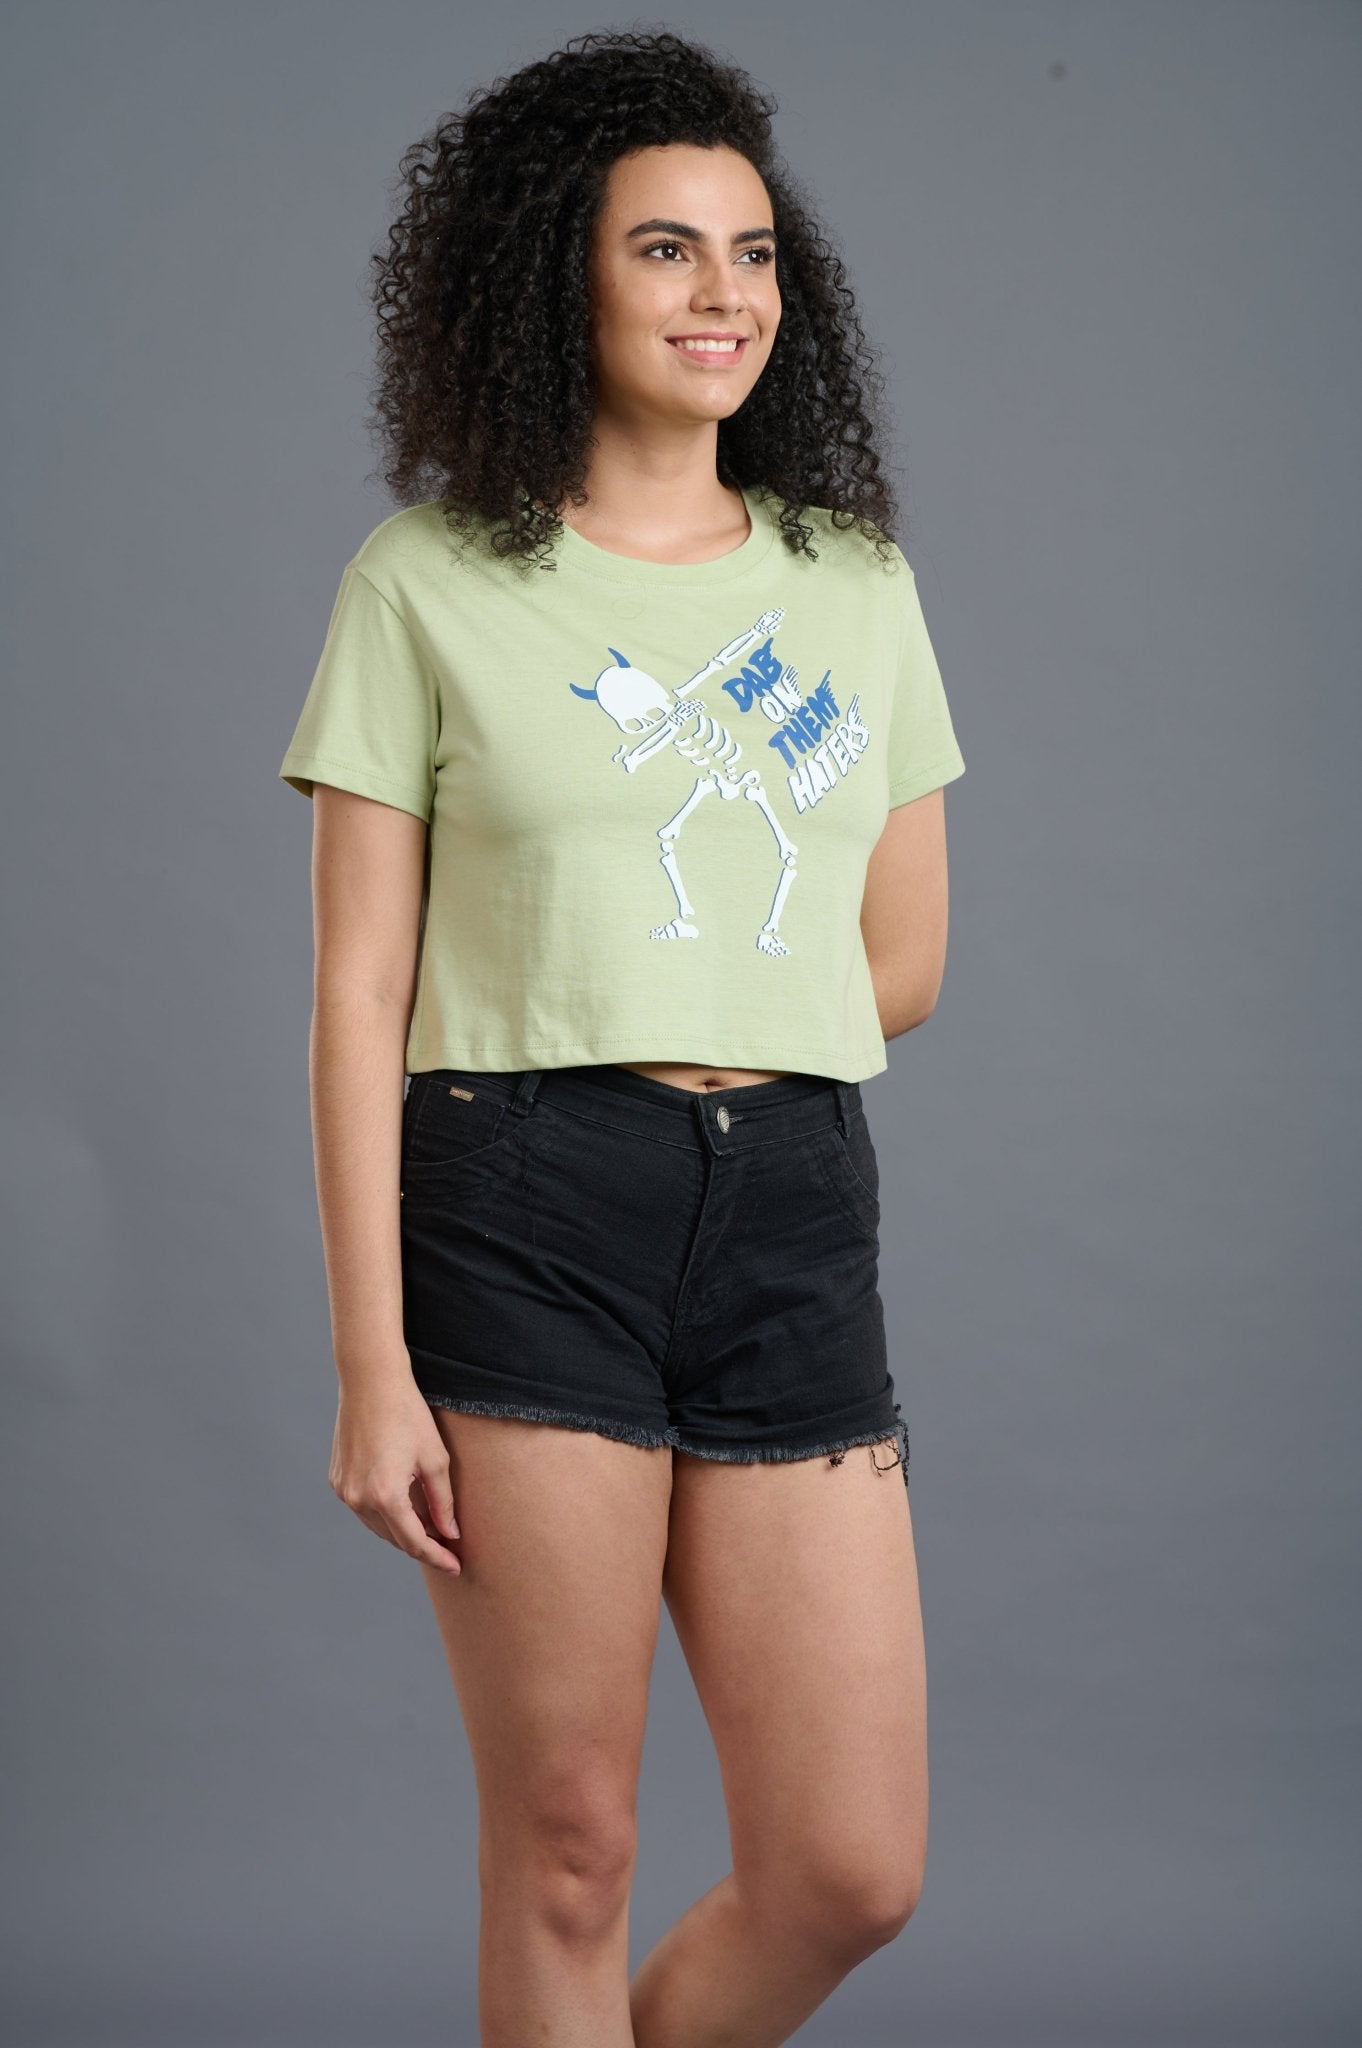 Dab On Them Haters With Skeleton Printed Crop Top for Women - Go Devil